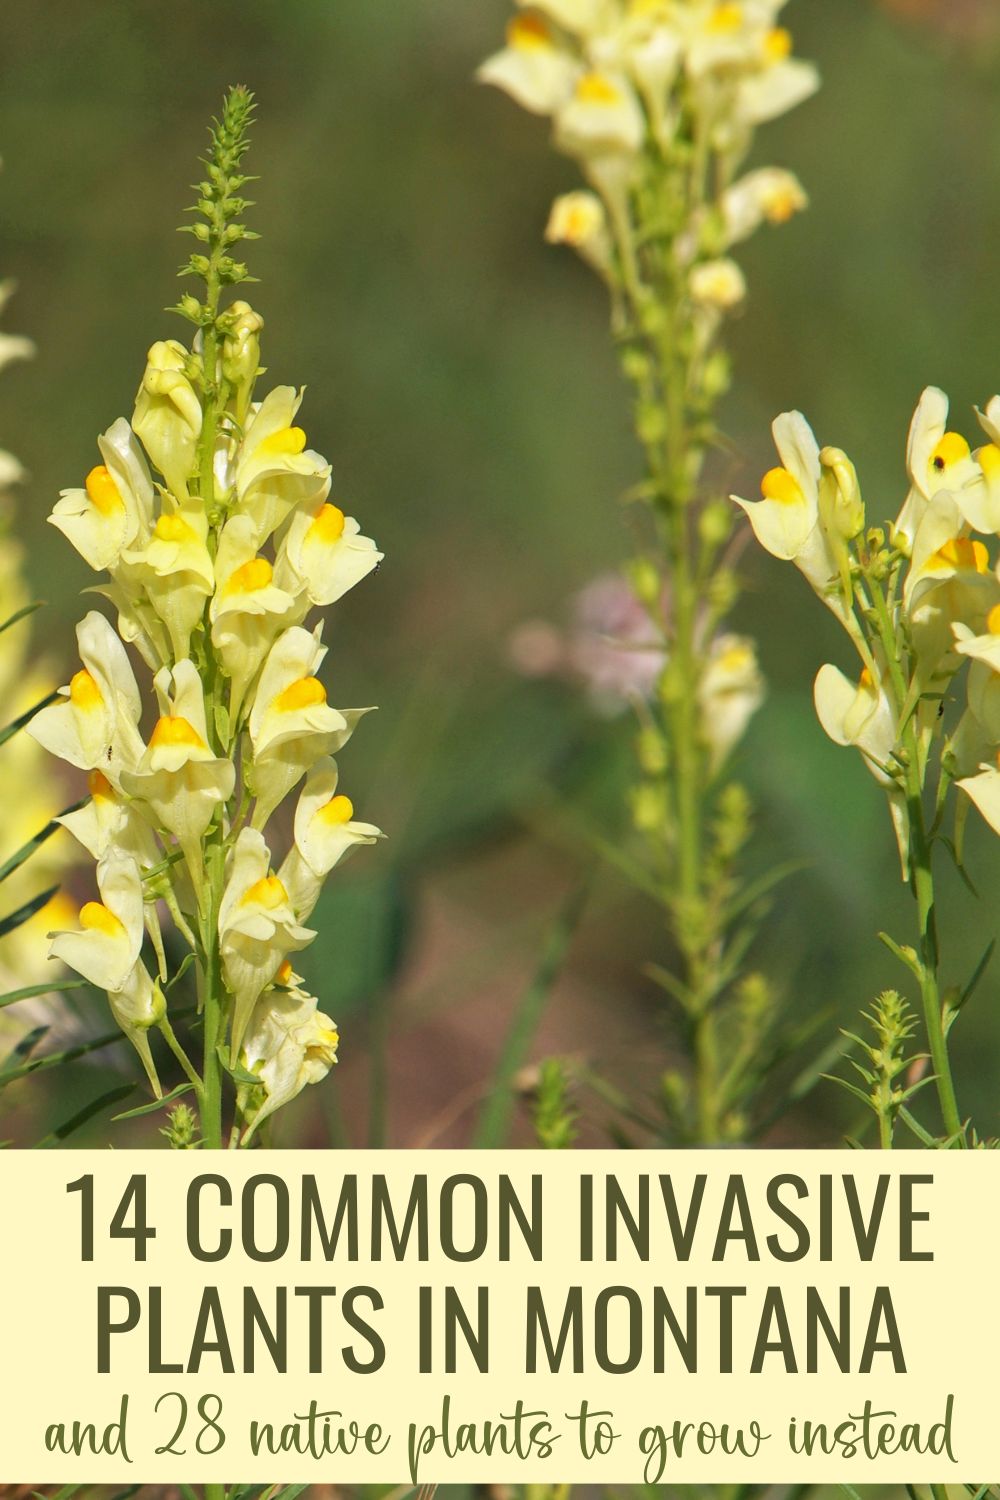 14 common invasive plants in Montana (and 28 native plants to grow instead).